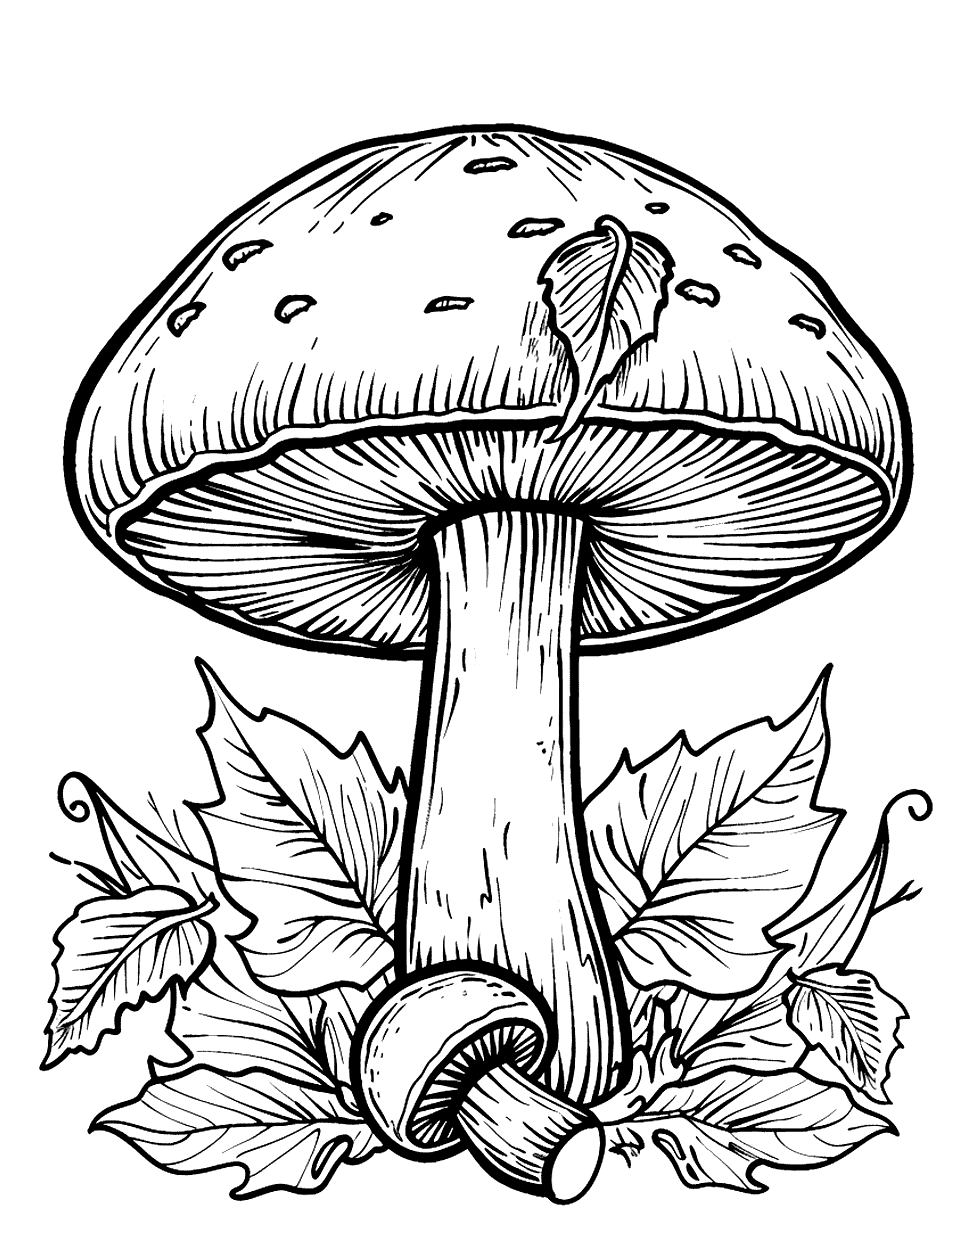 Aesthetic Mushroom and Leaves Coloring Page - A beautifully shaped mushroom surrounded by fallen autumn leaves.